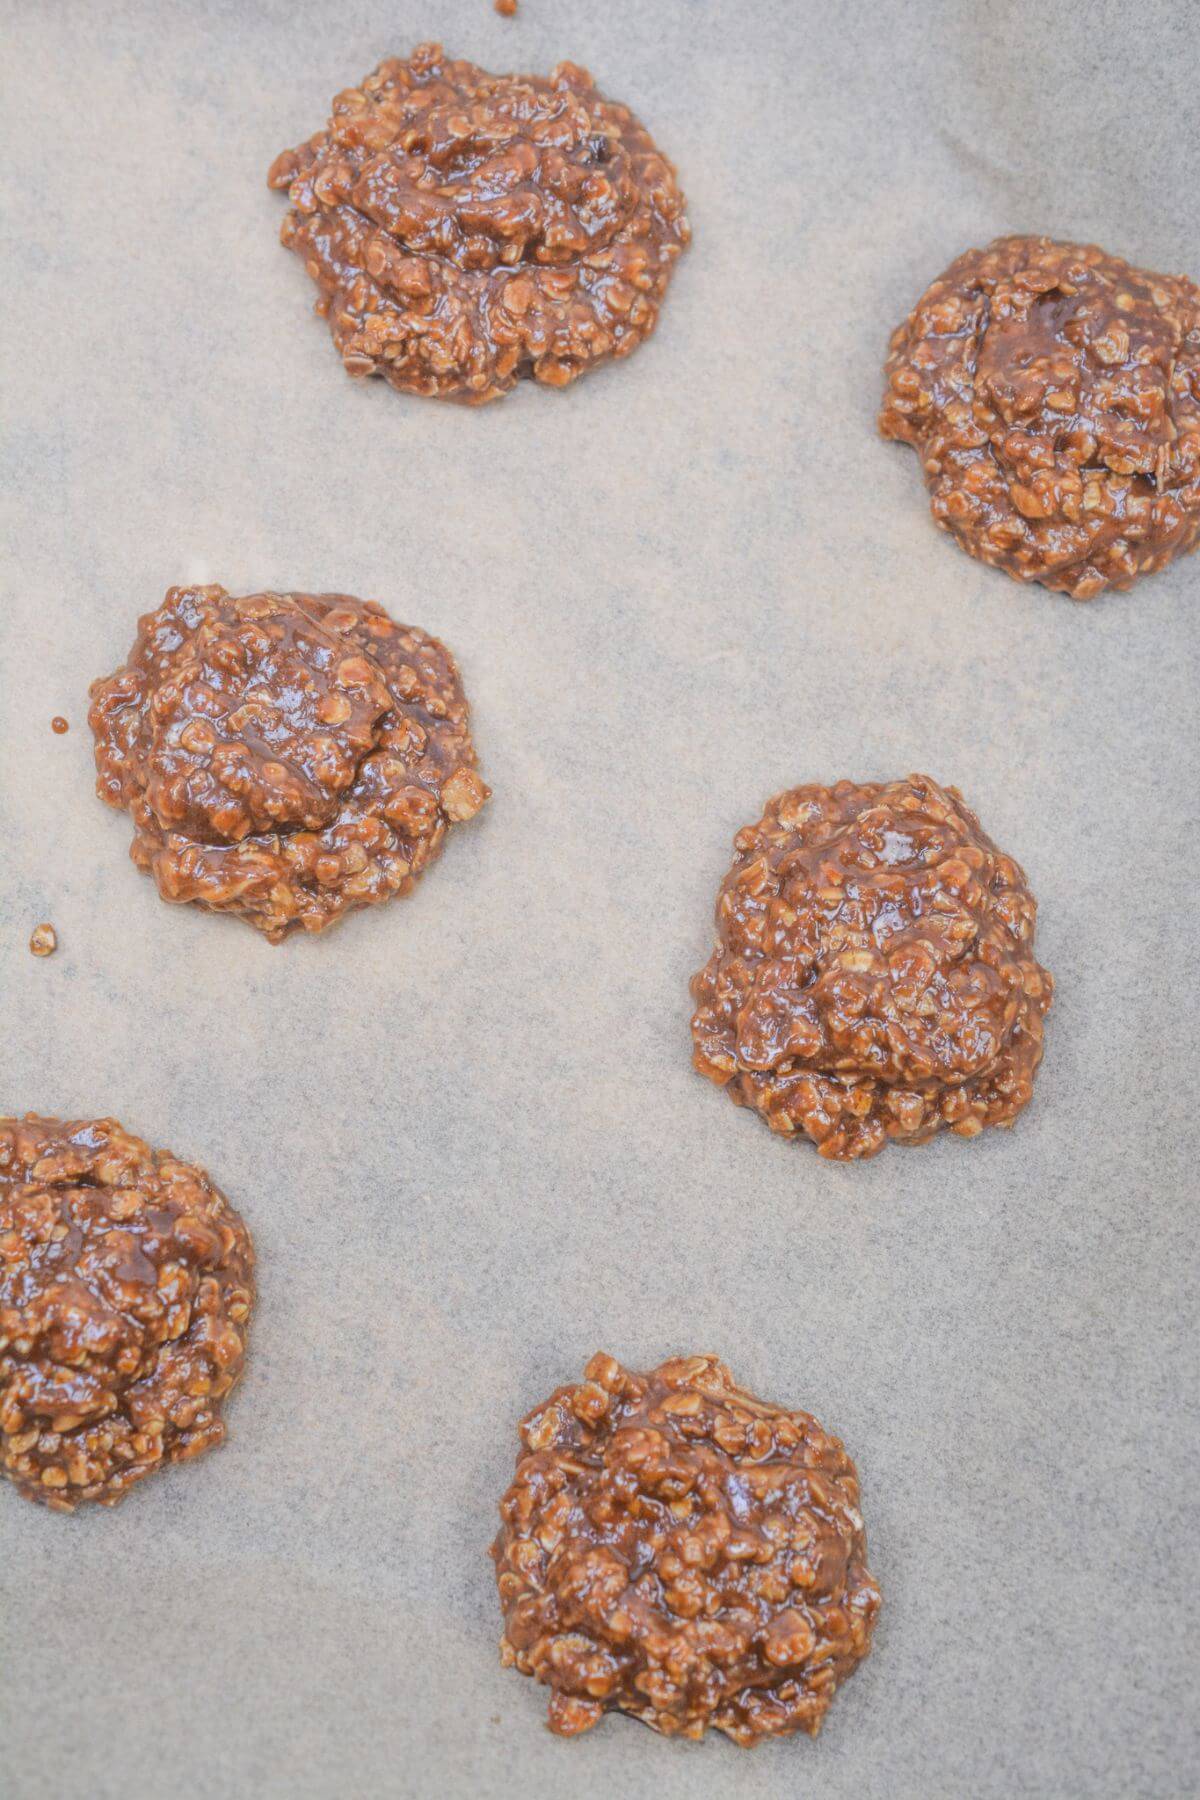 drops of no bake chocolate oatmeal cookie mixture onto parchment paper.